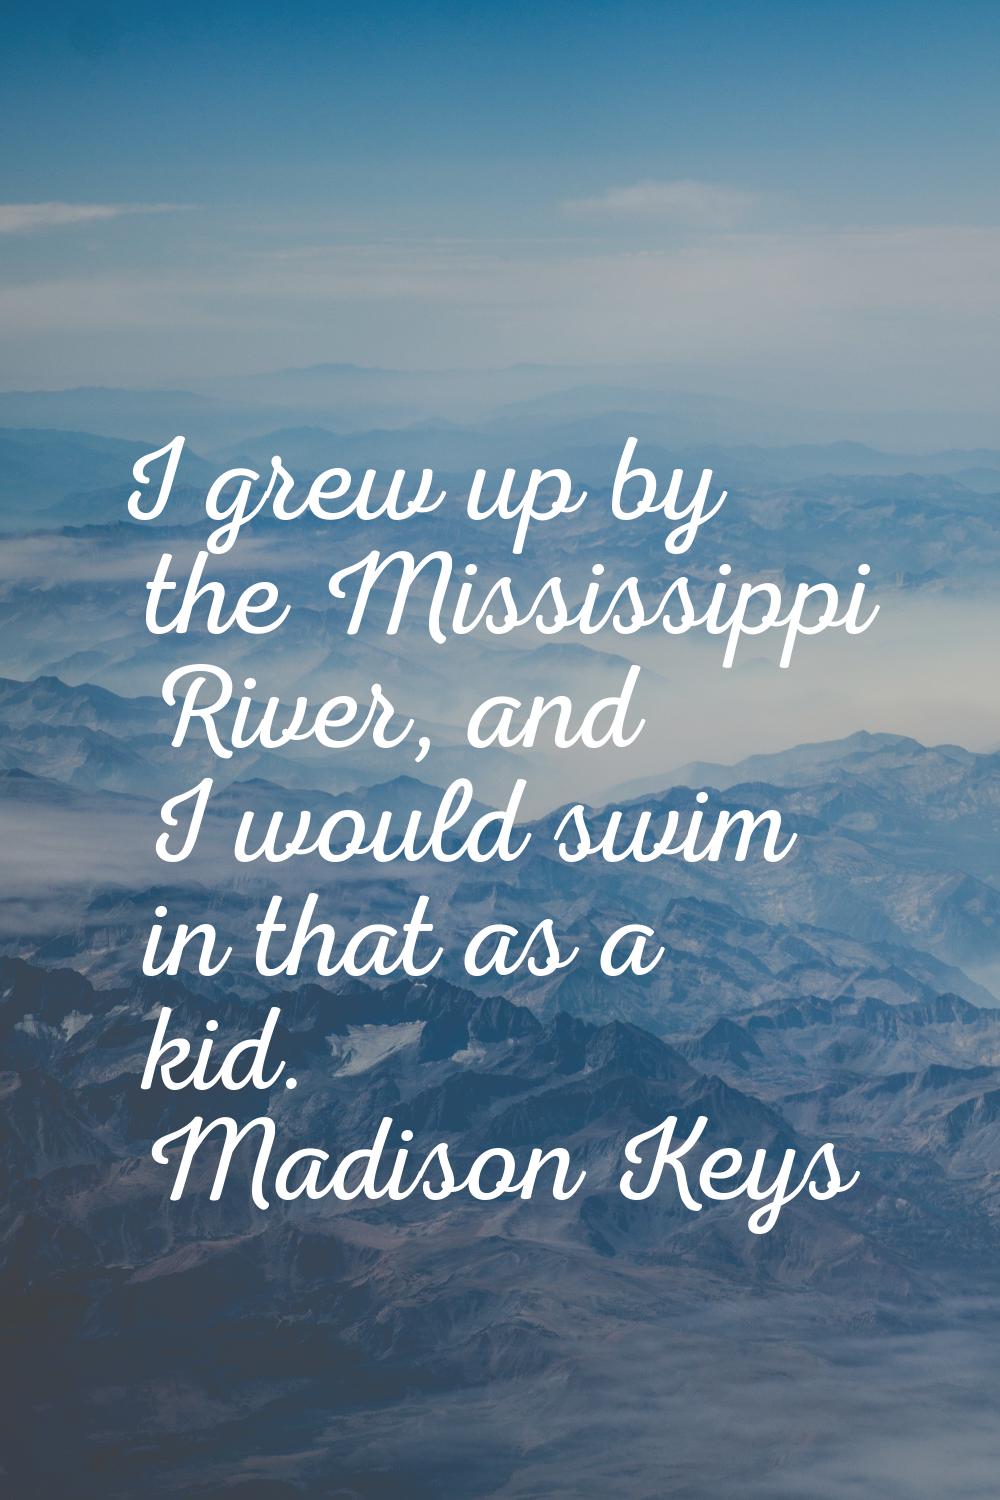 I grew up by the Mississippi River, and I would swim in that as a kid.